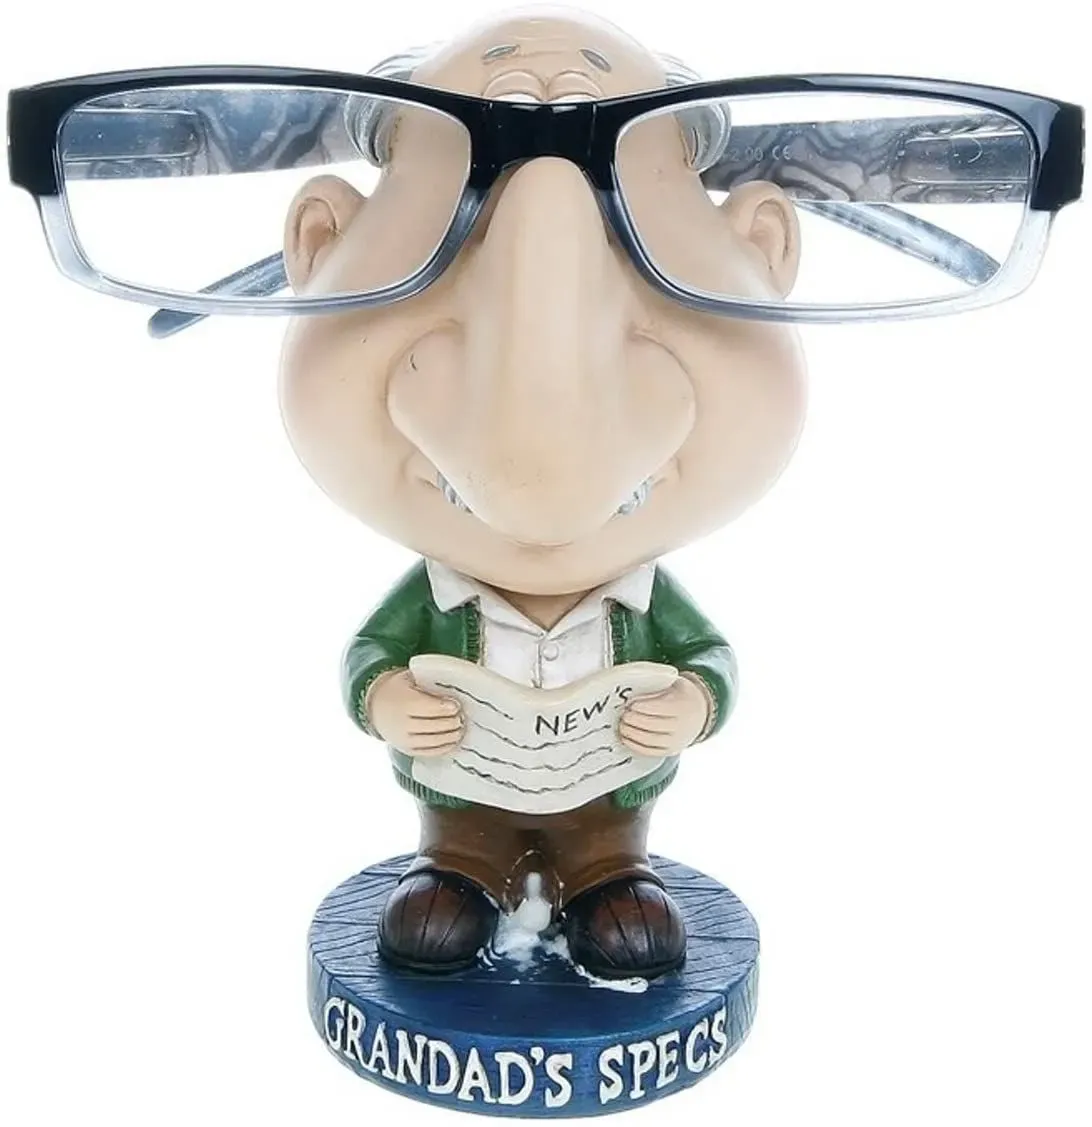 Comical Grandad Spectacles Glasses Stand